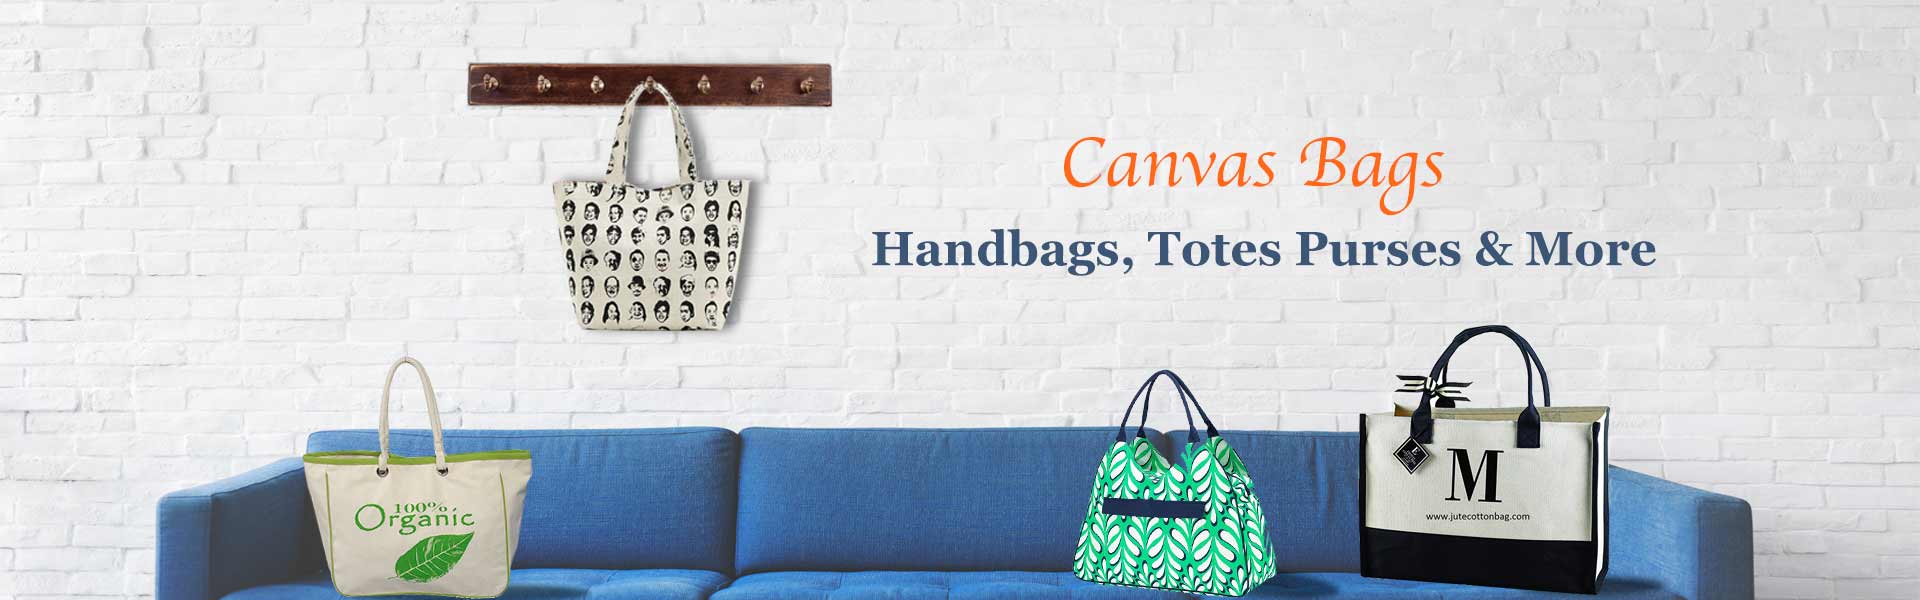 Wholesale Canvas Bags Supplier in Ireland